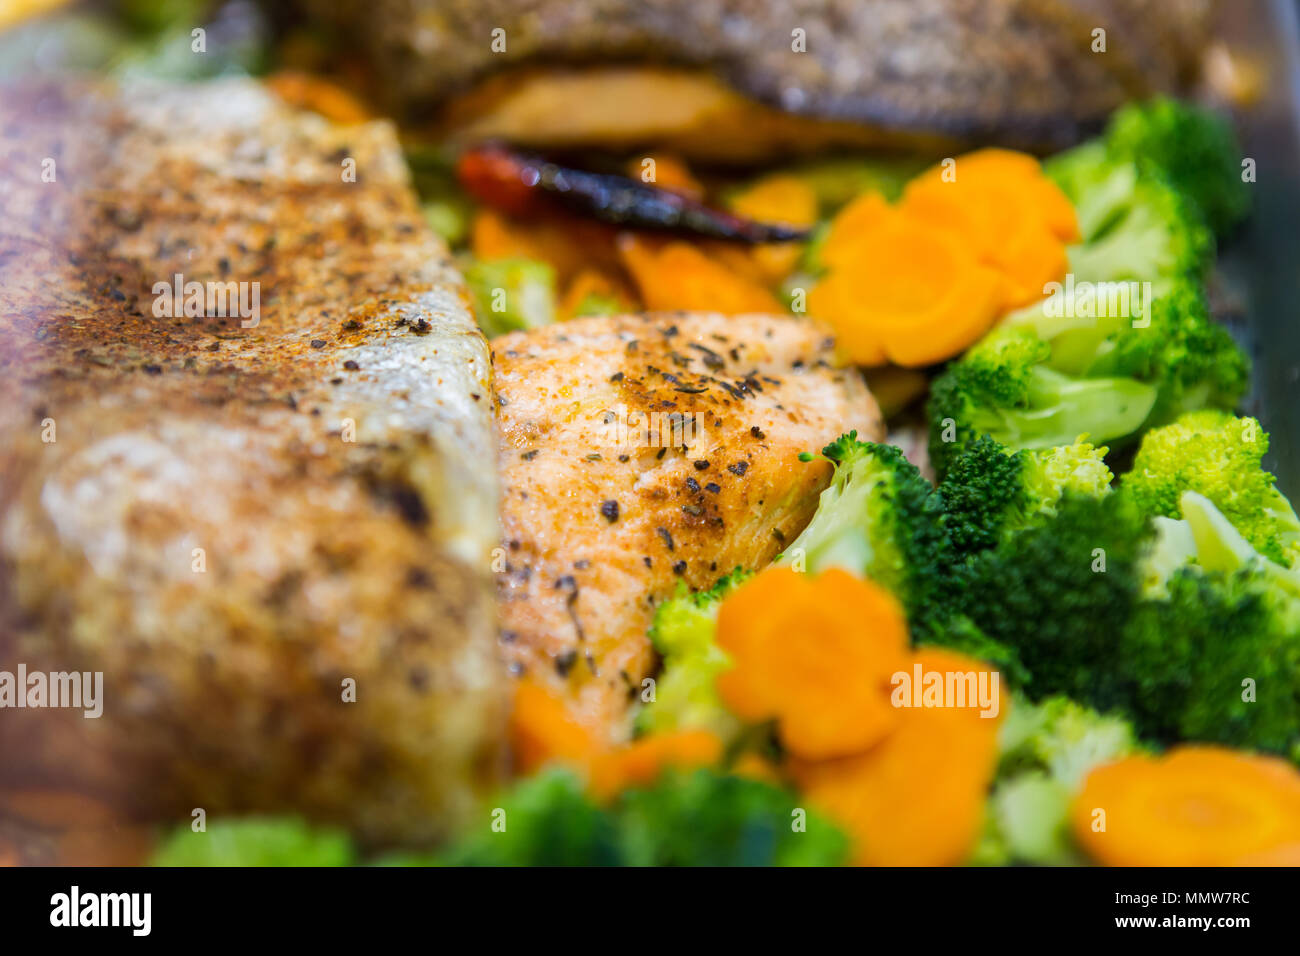 Close up of a delicious plate of meal consists of broccoli, carrots and salmon fish. Stock Photo